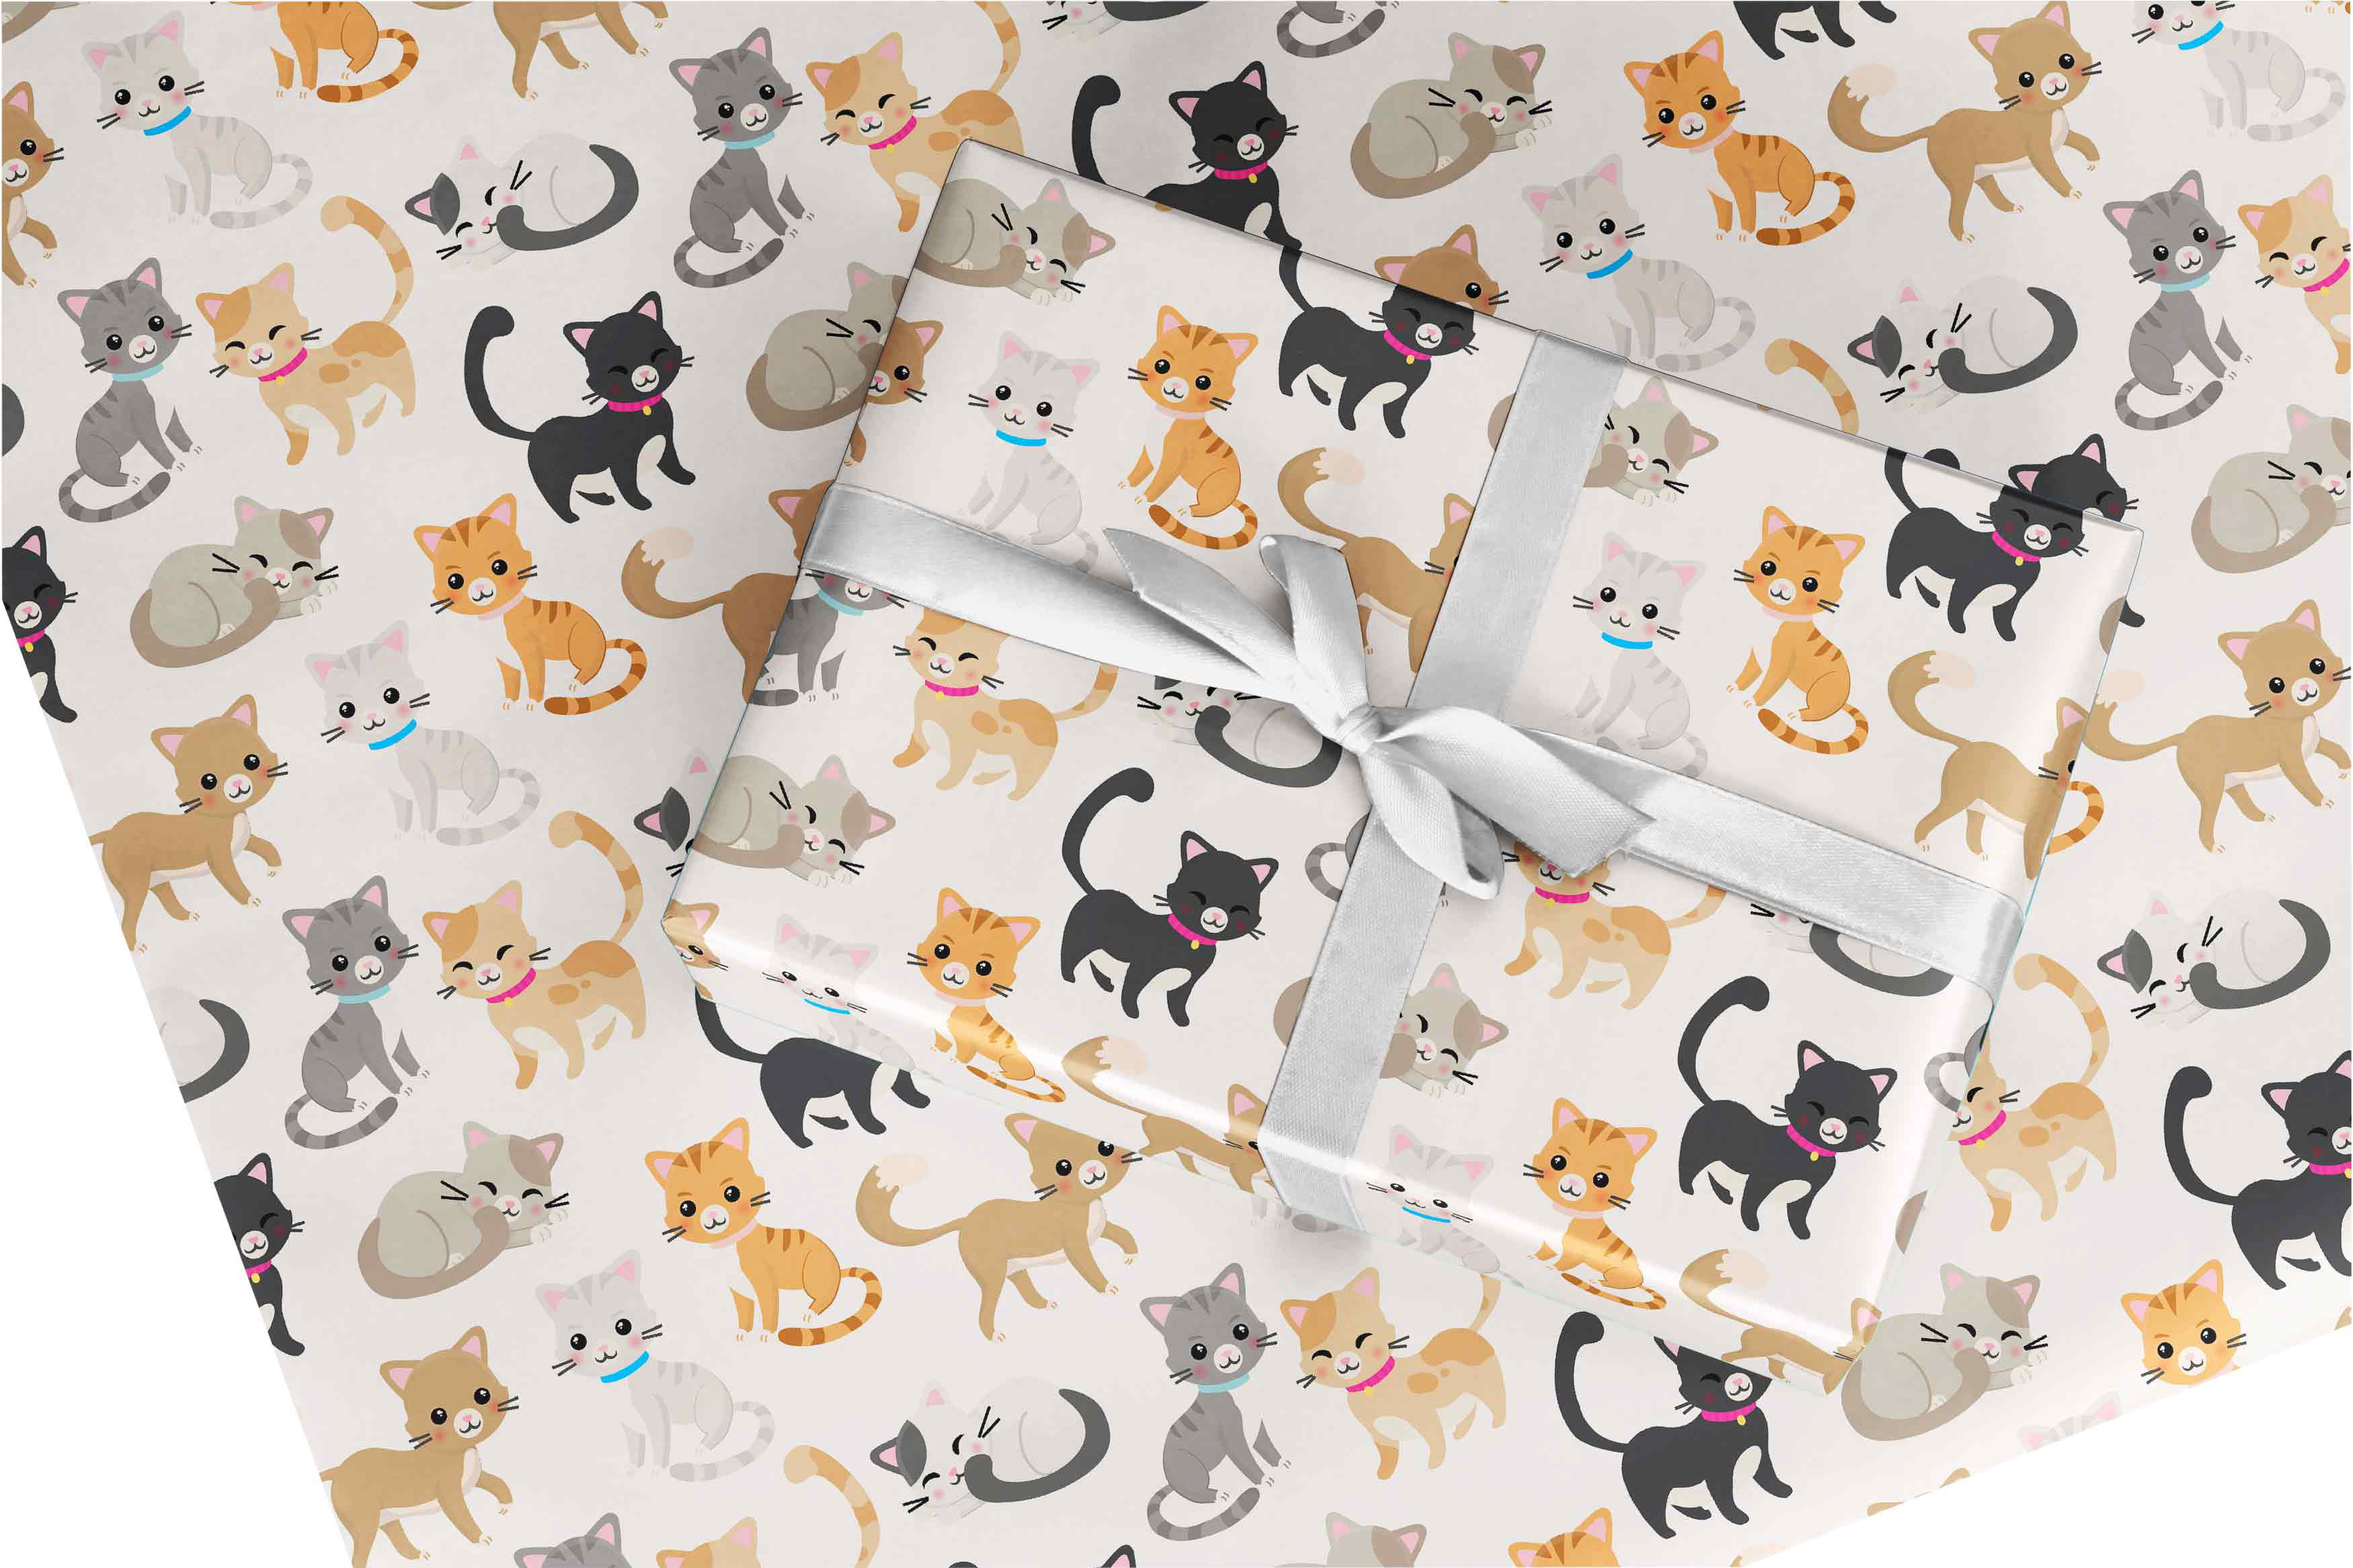 Paw Print Dog Cat White on Black Premium Gift Wrap Wrapping Paper Roll 